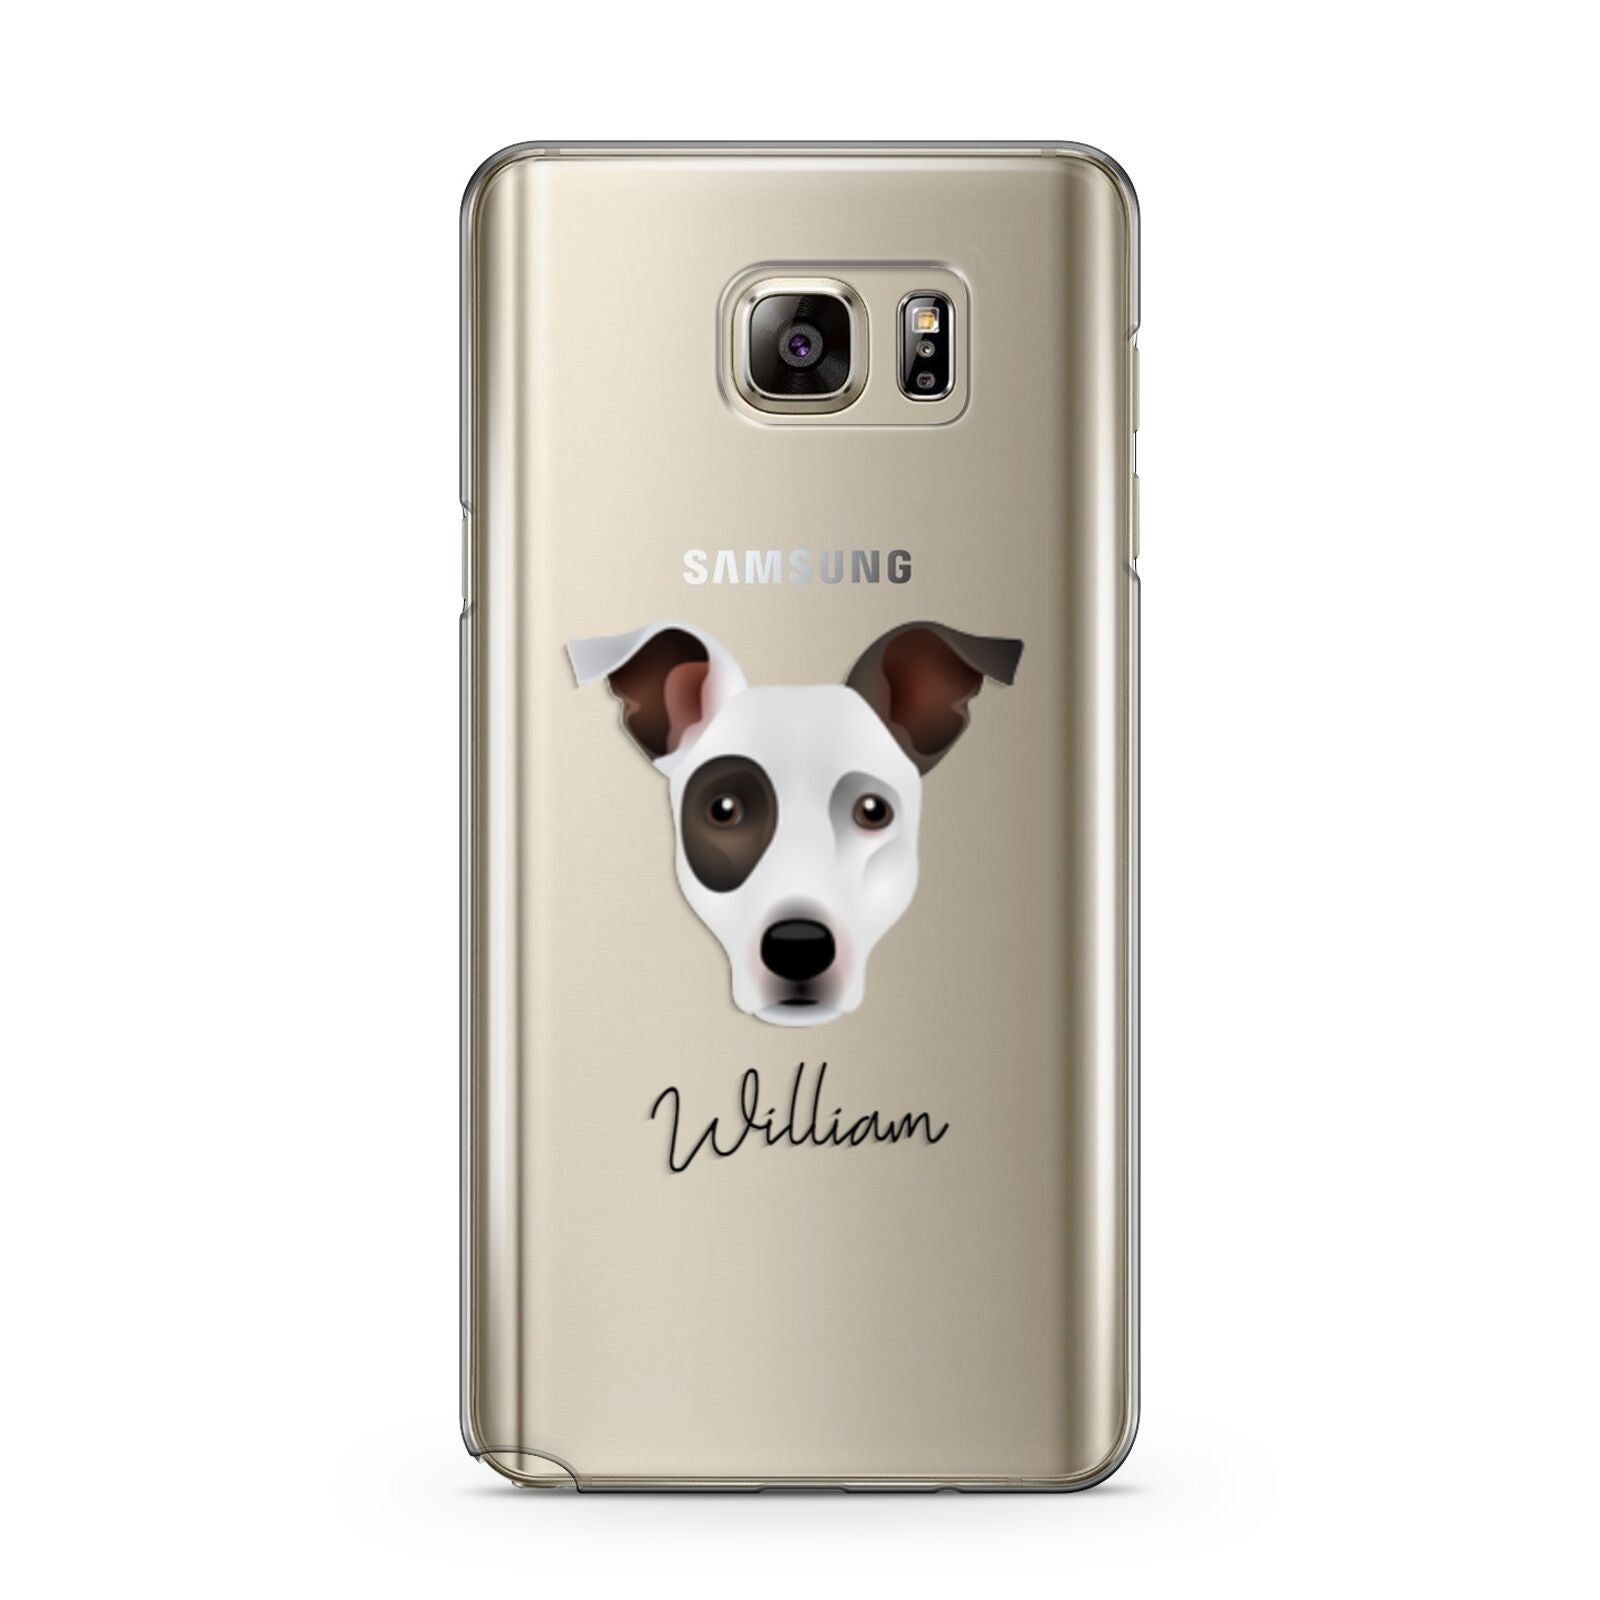 Staffy Jack Personalised Samsung Galaxy Note 5 Case